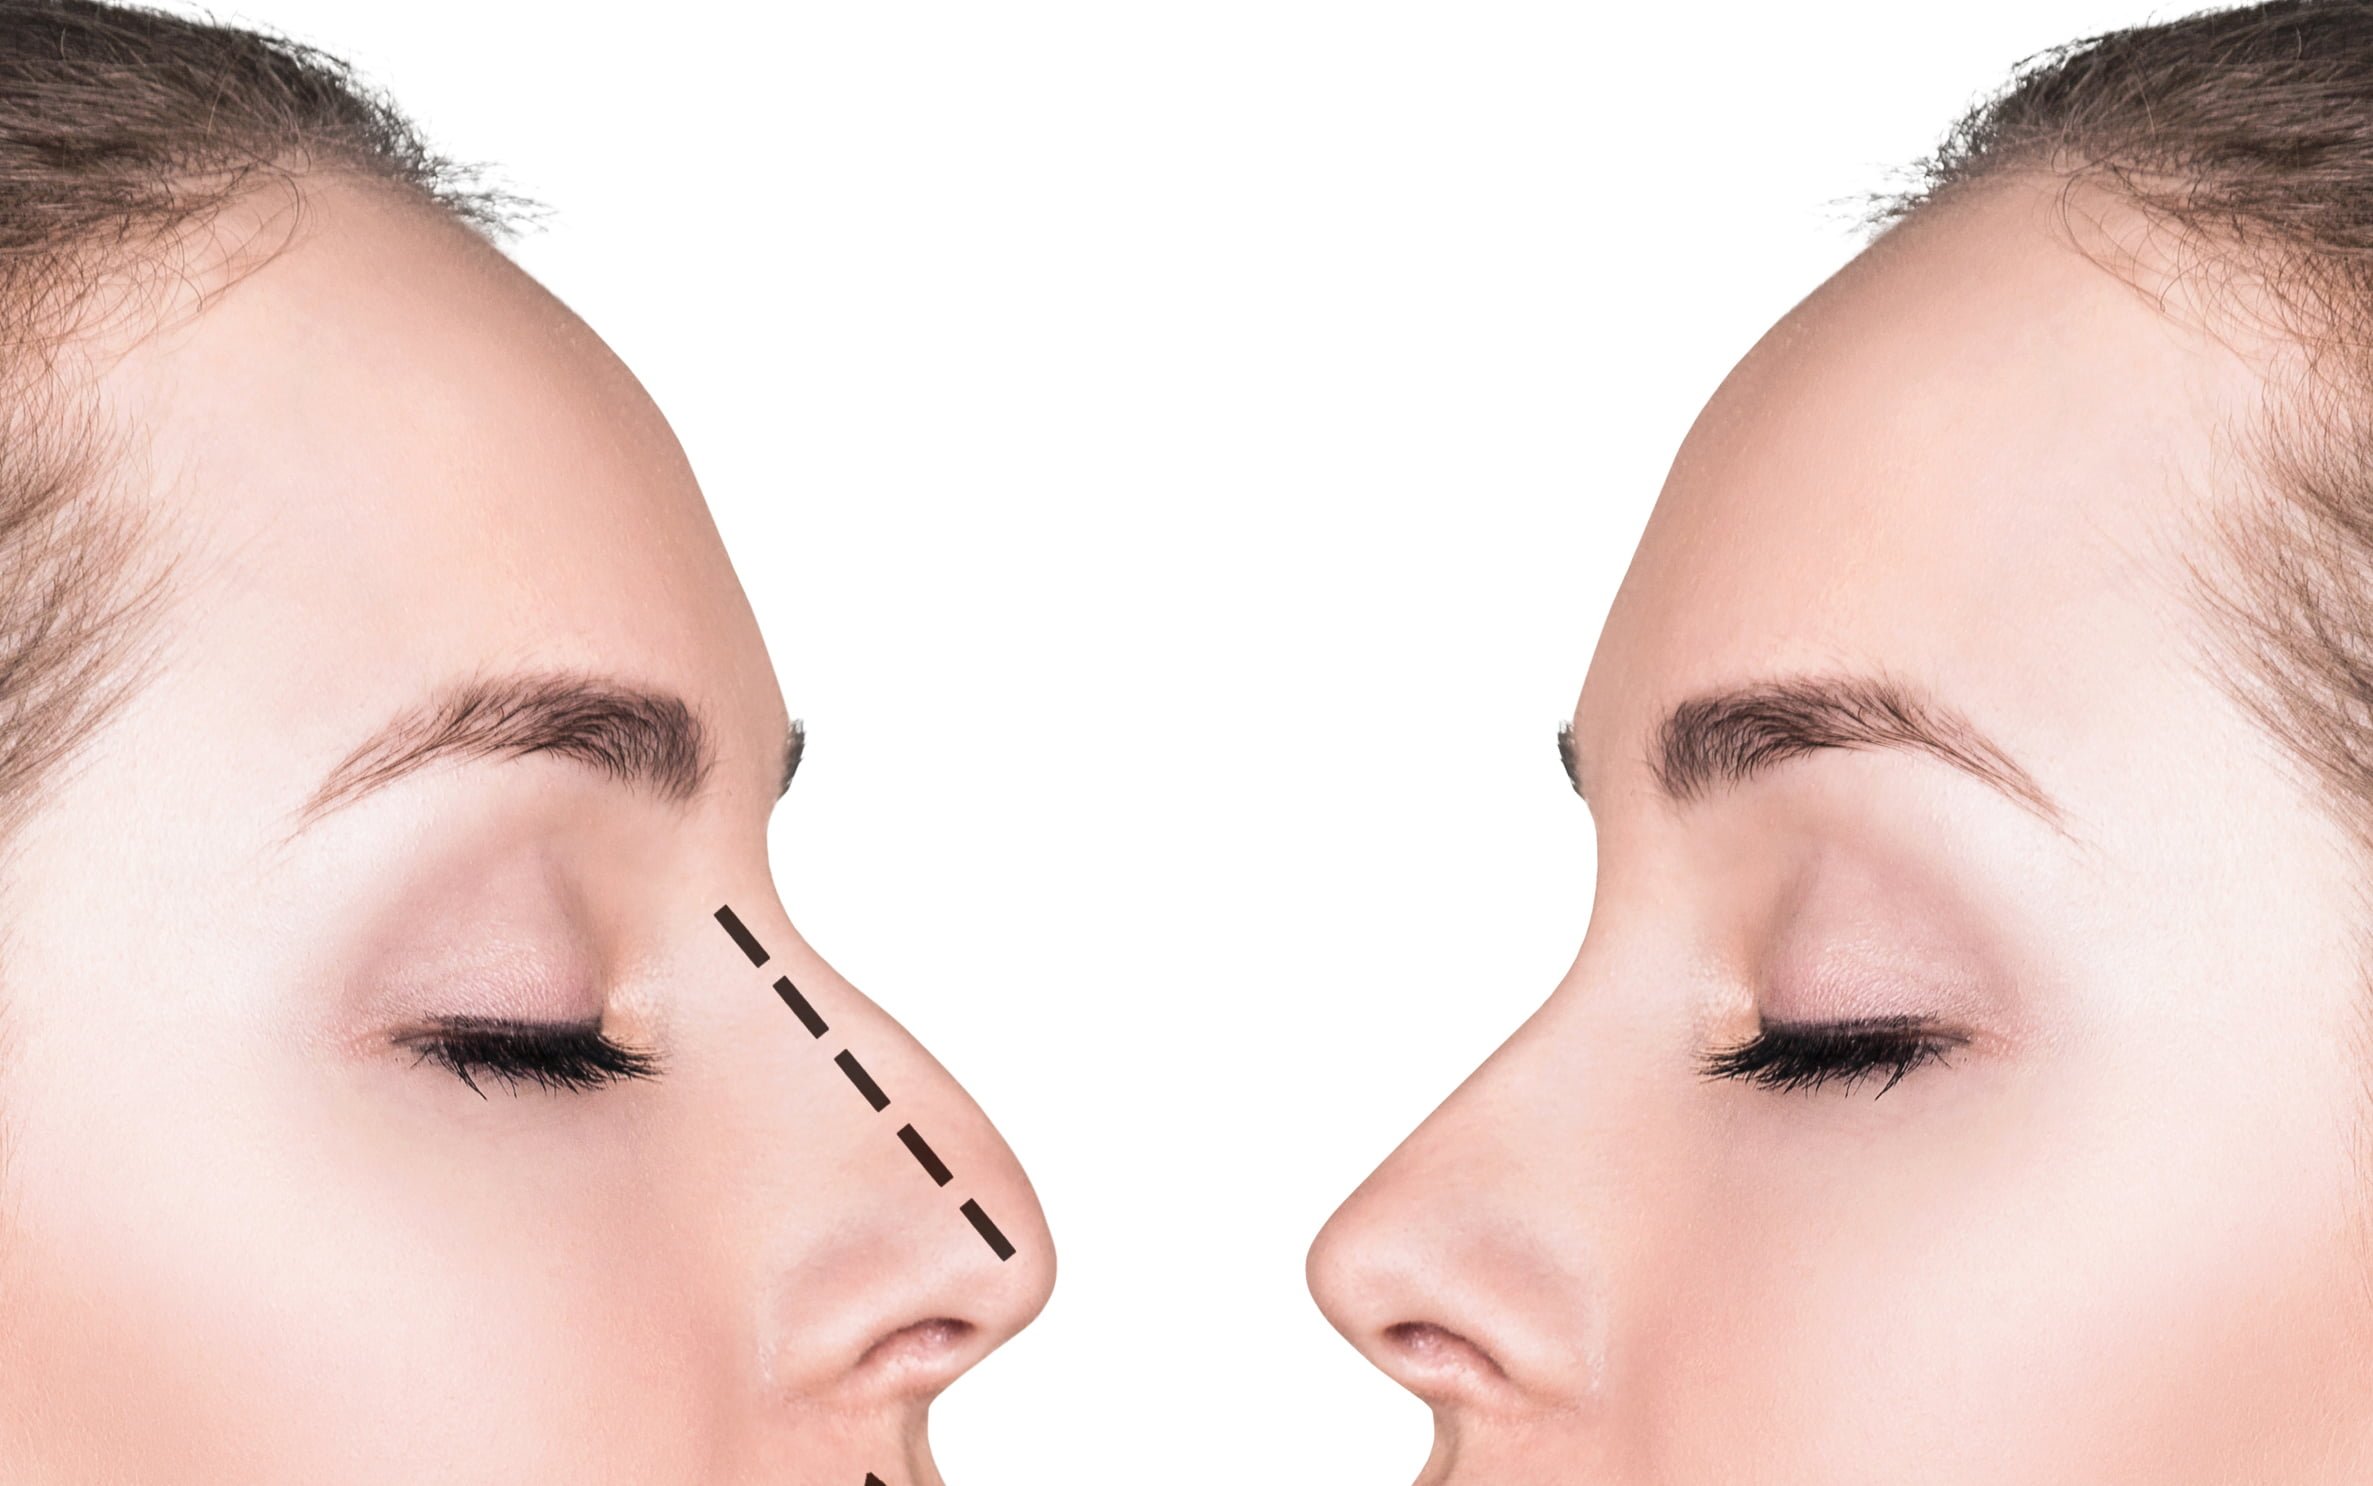 Bump On Nose Treatment Without Surgery Dr Aesthetica bump on nose treatment without surgery